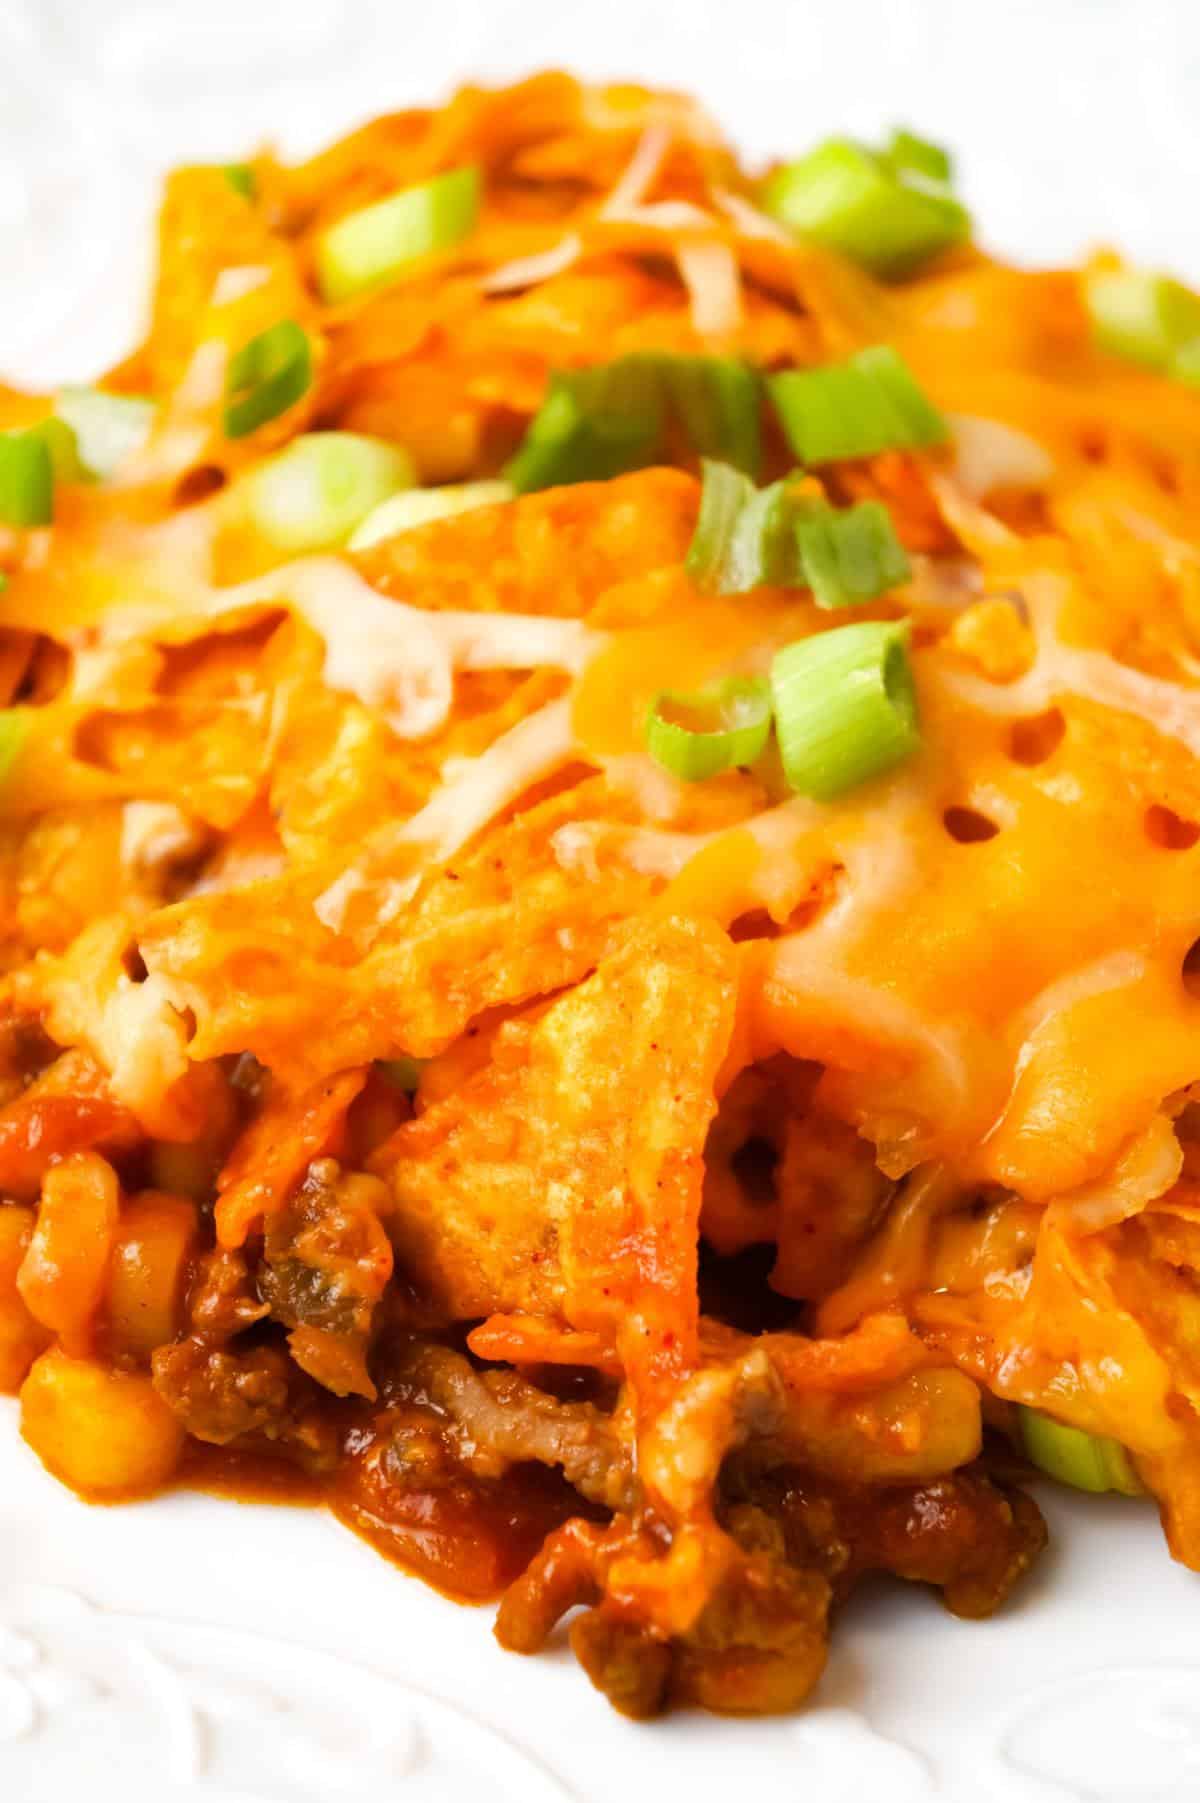 Doritos Chili Pie is an easy ground beef casserole recipe loaded with chili sauce, chunky salsa, corn, shredded cheese, crumbled Doritos and chopped green onions.